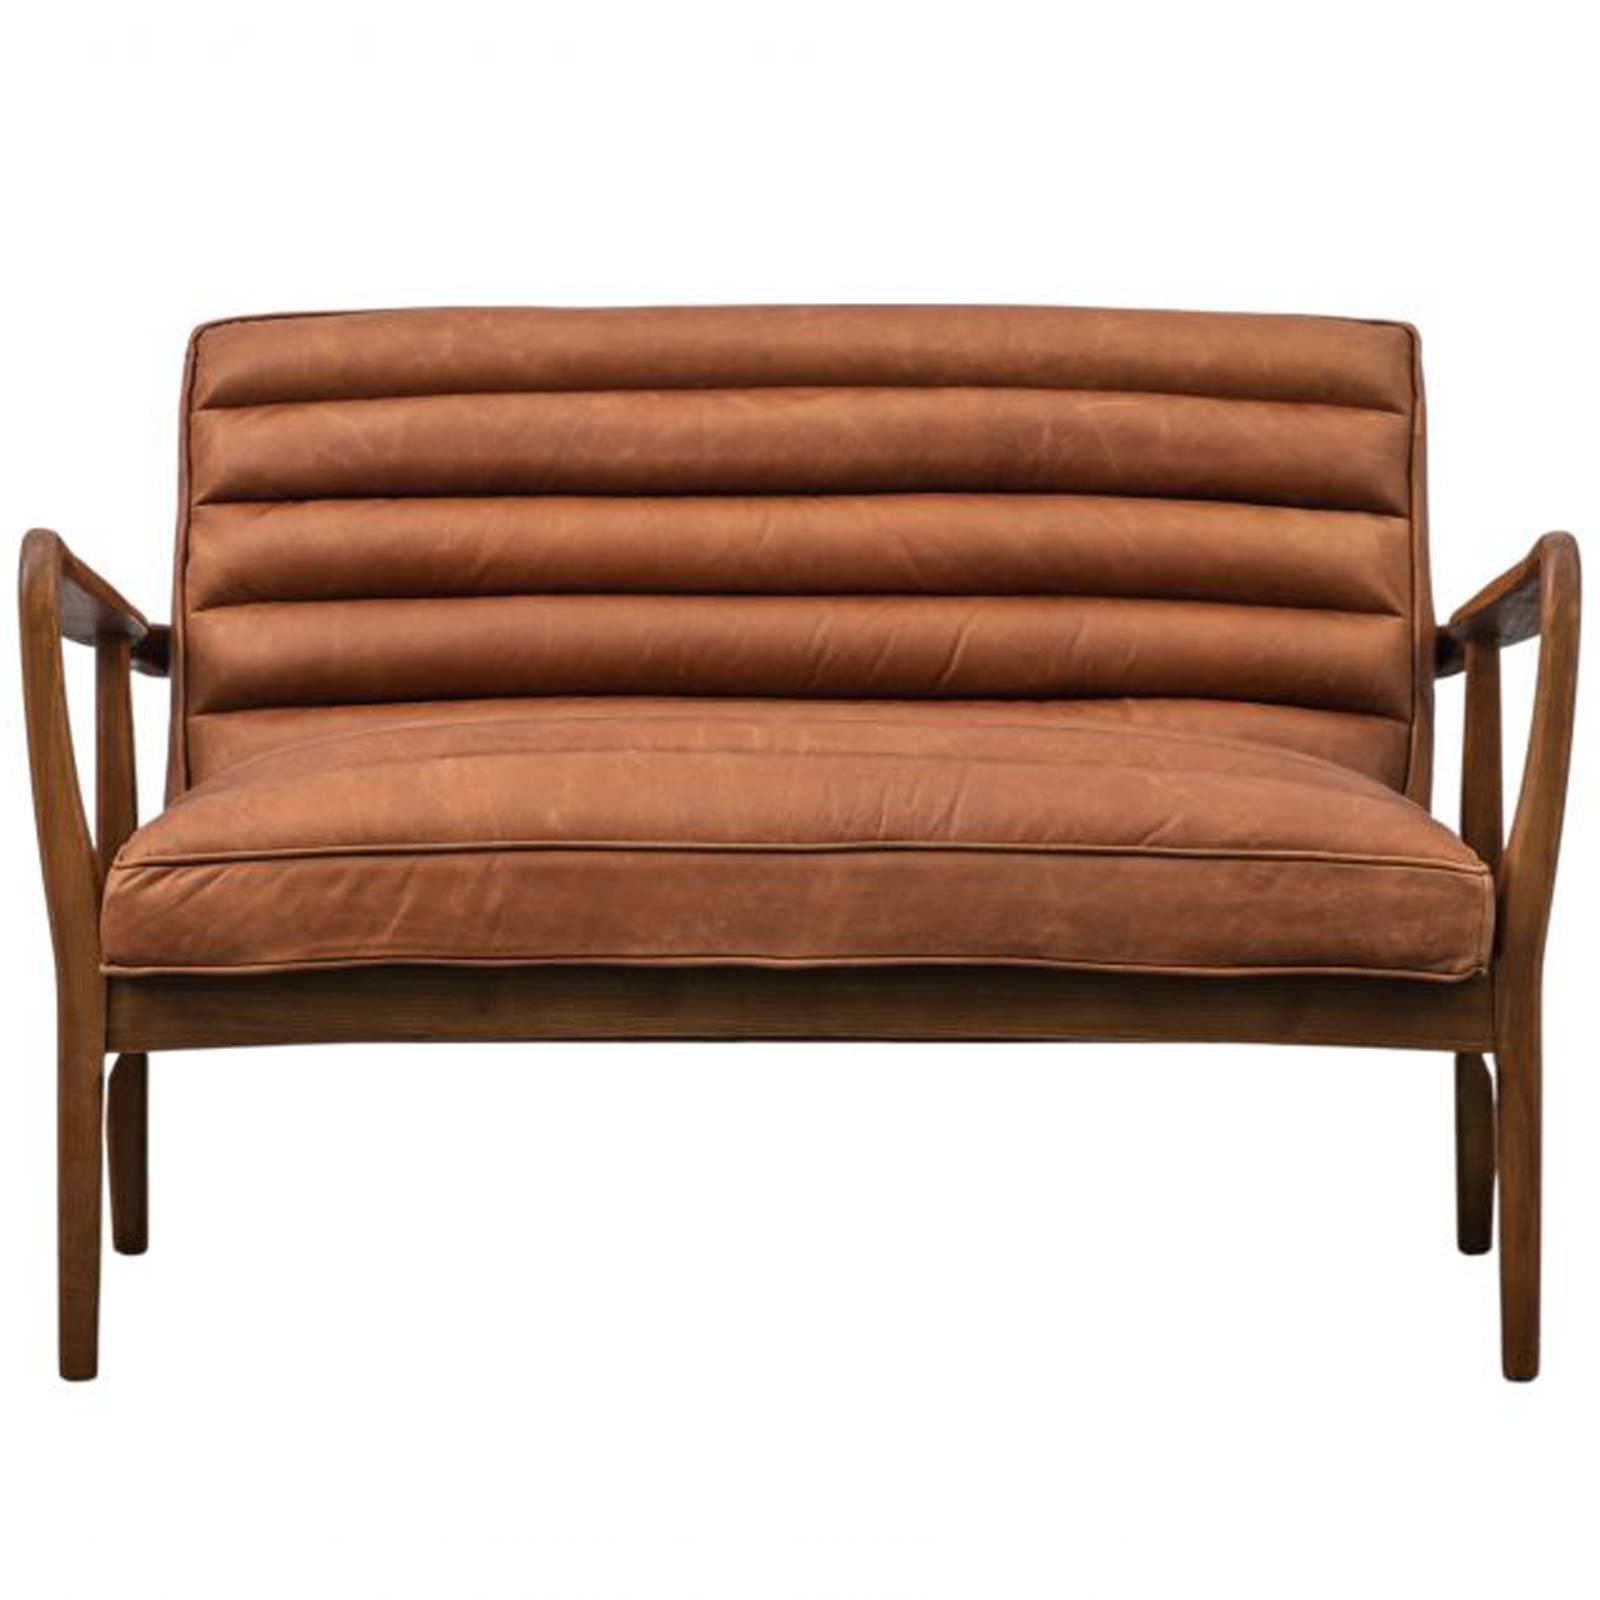 The Auto Oak 2 Seater Sofa in Distressed Brown Leather